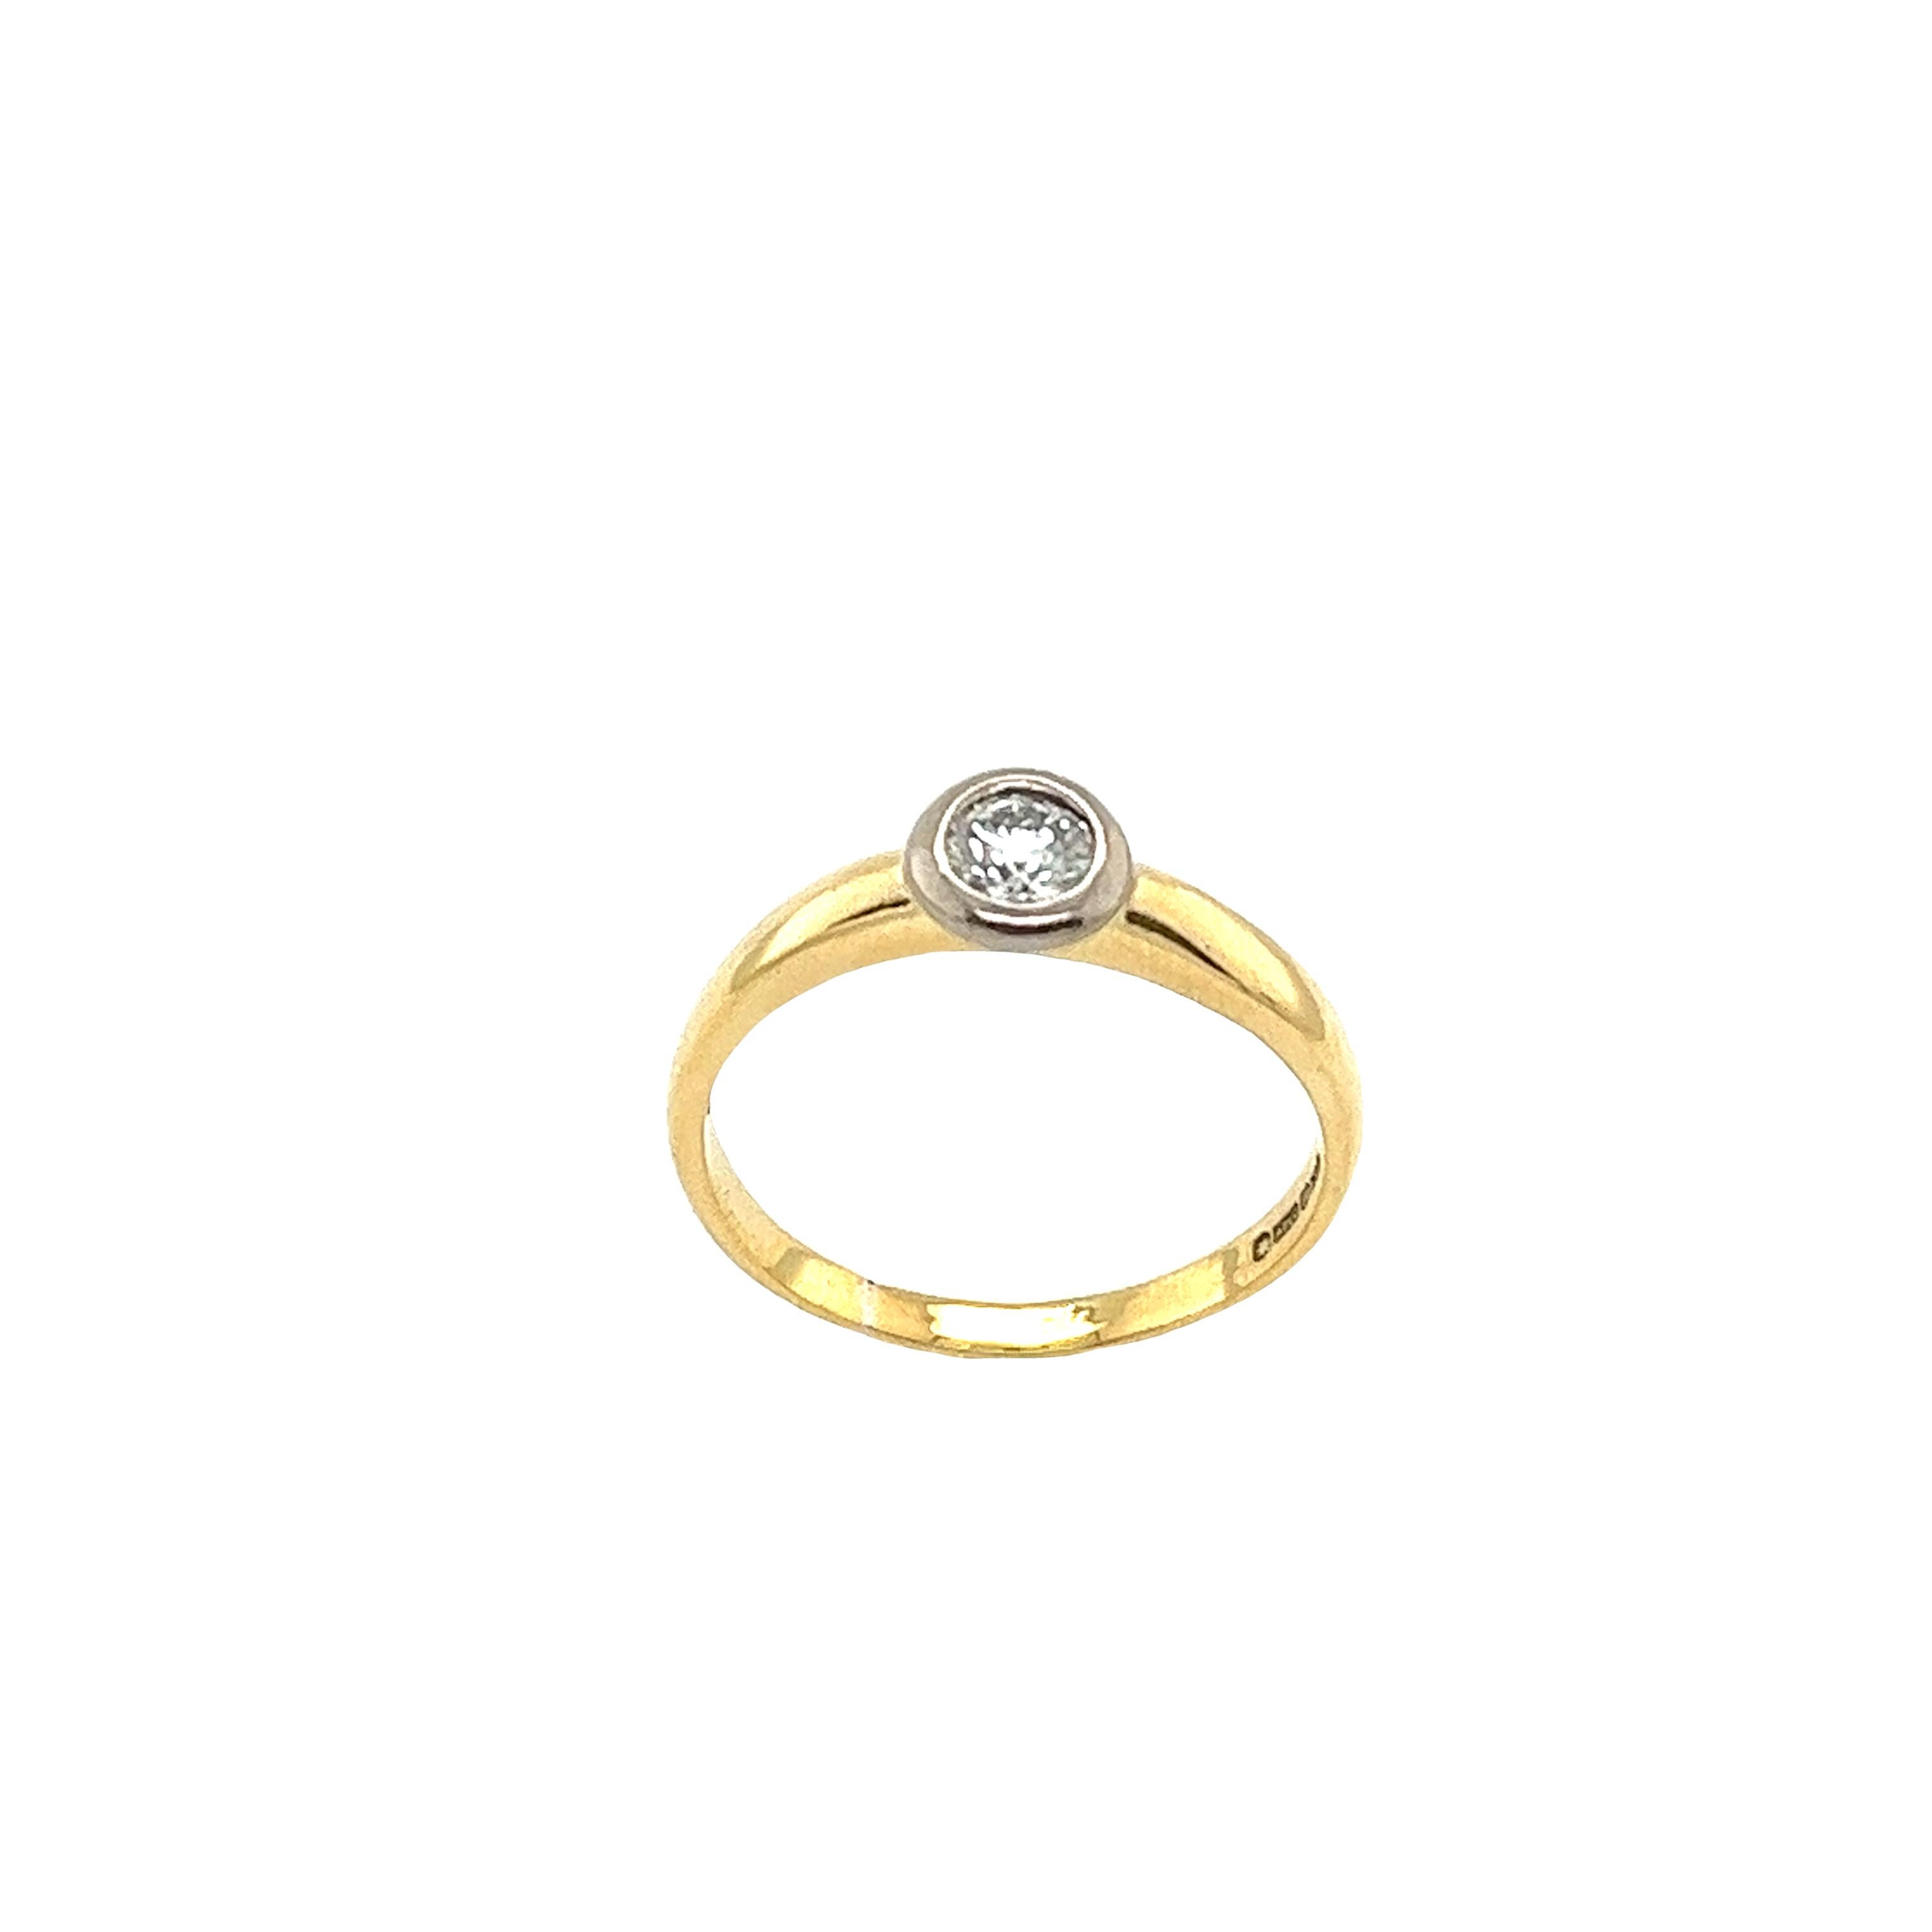 18ct Yellow Gold & White Solitaire Diamond Ring Set With 1 Round Diamond For Sale 1